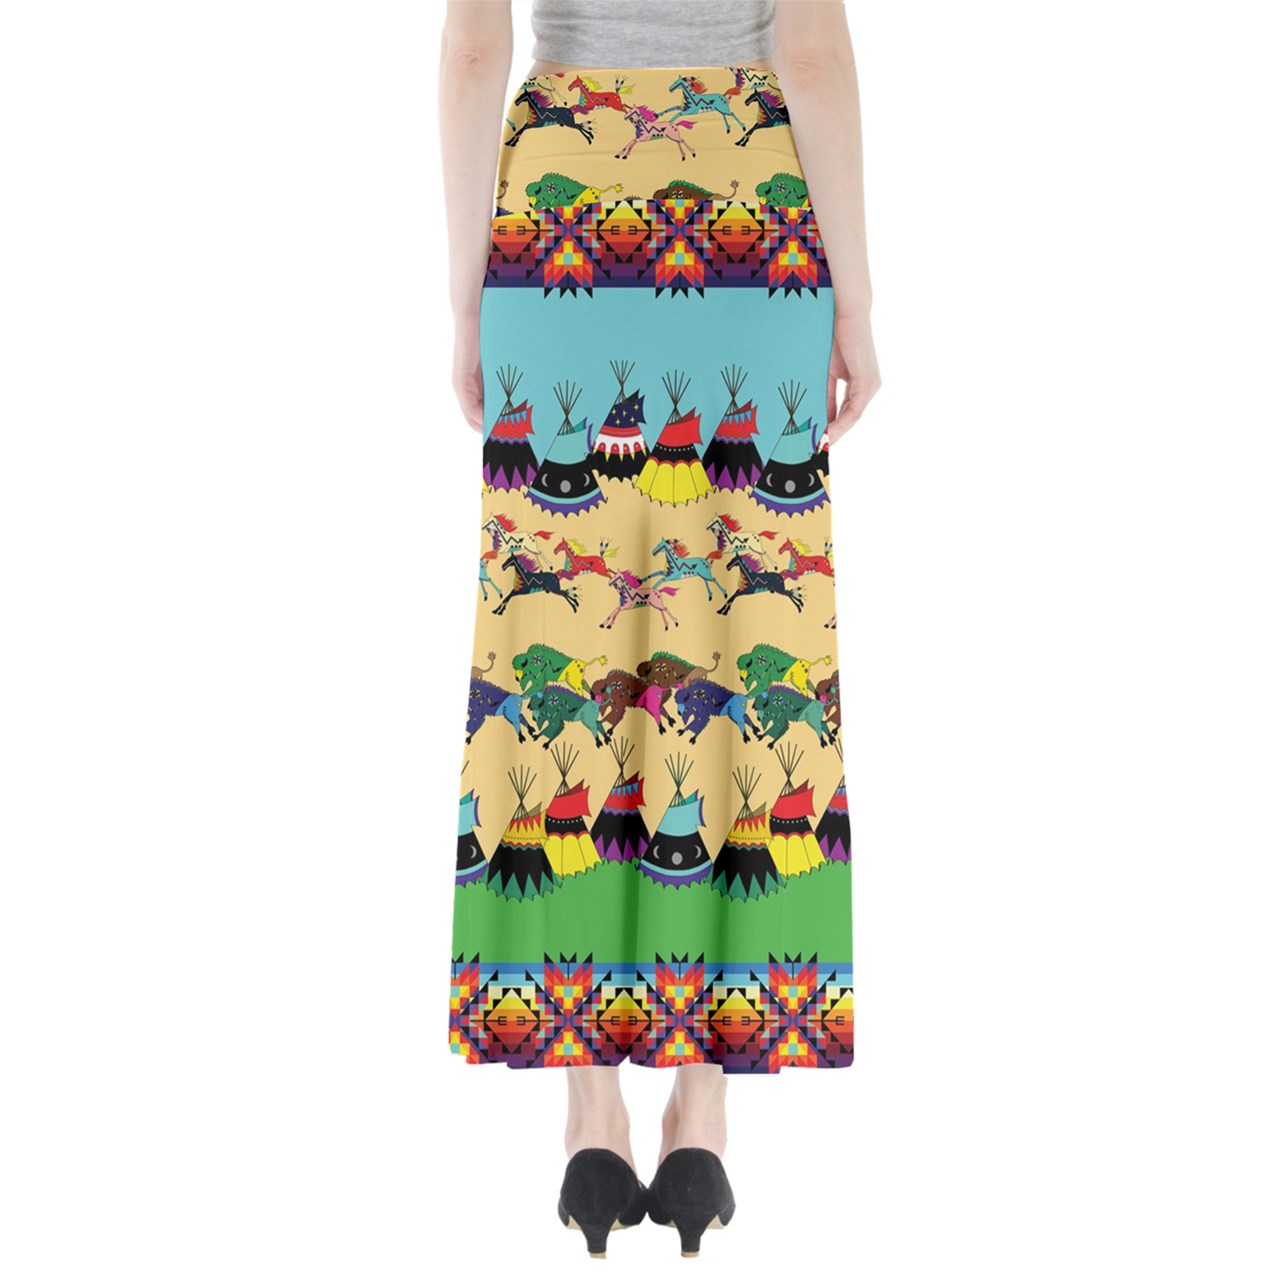 Prairie Bison with Horses Turquoise Full Length Maxi Skirt